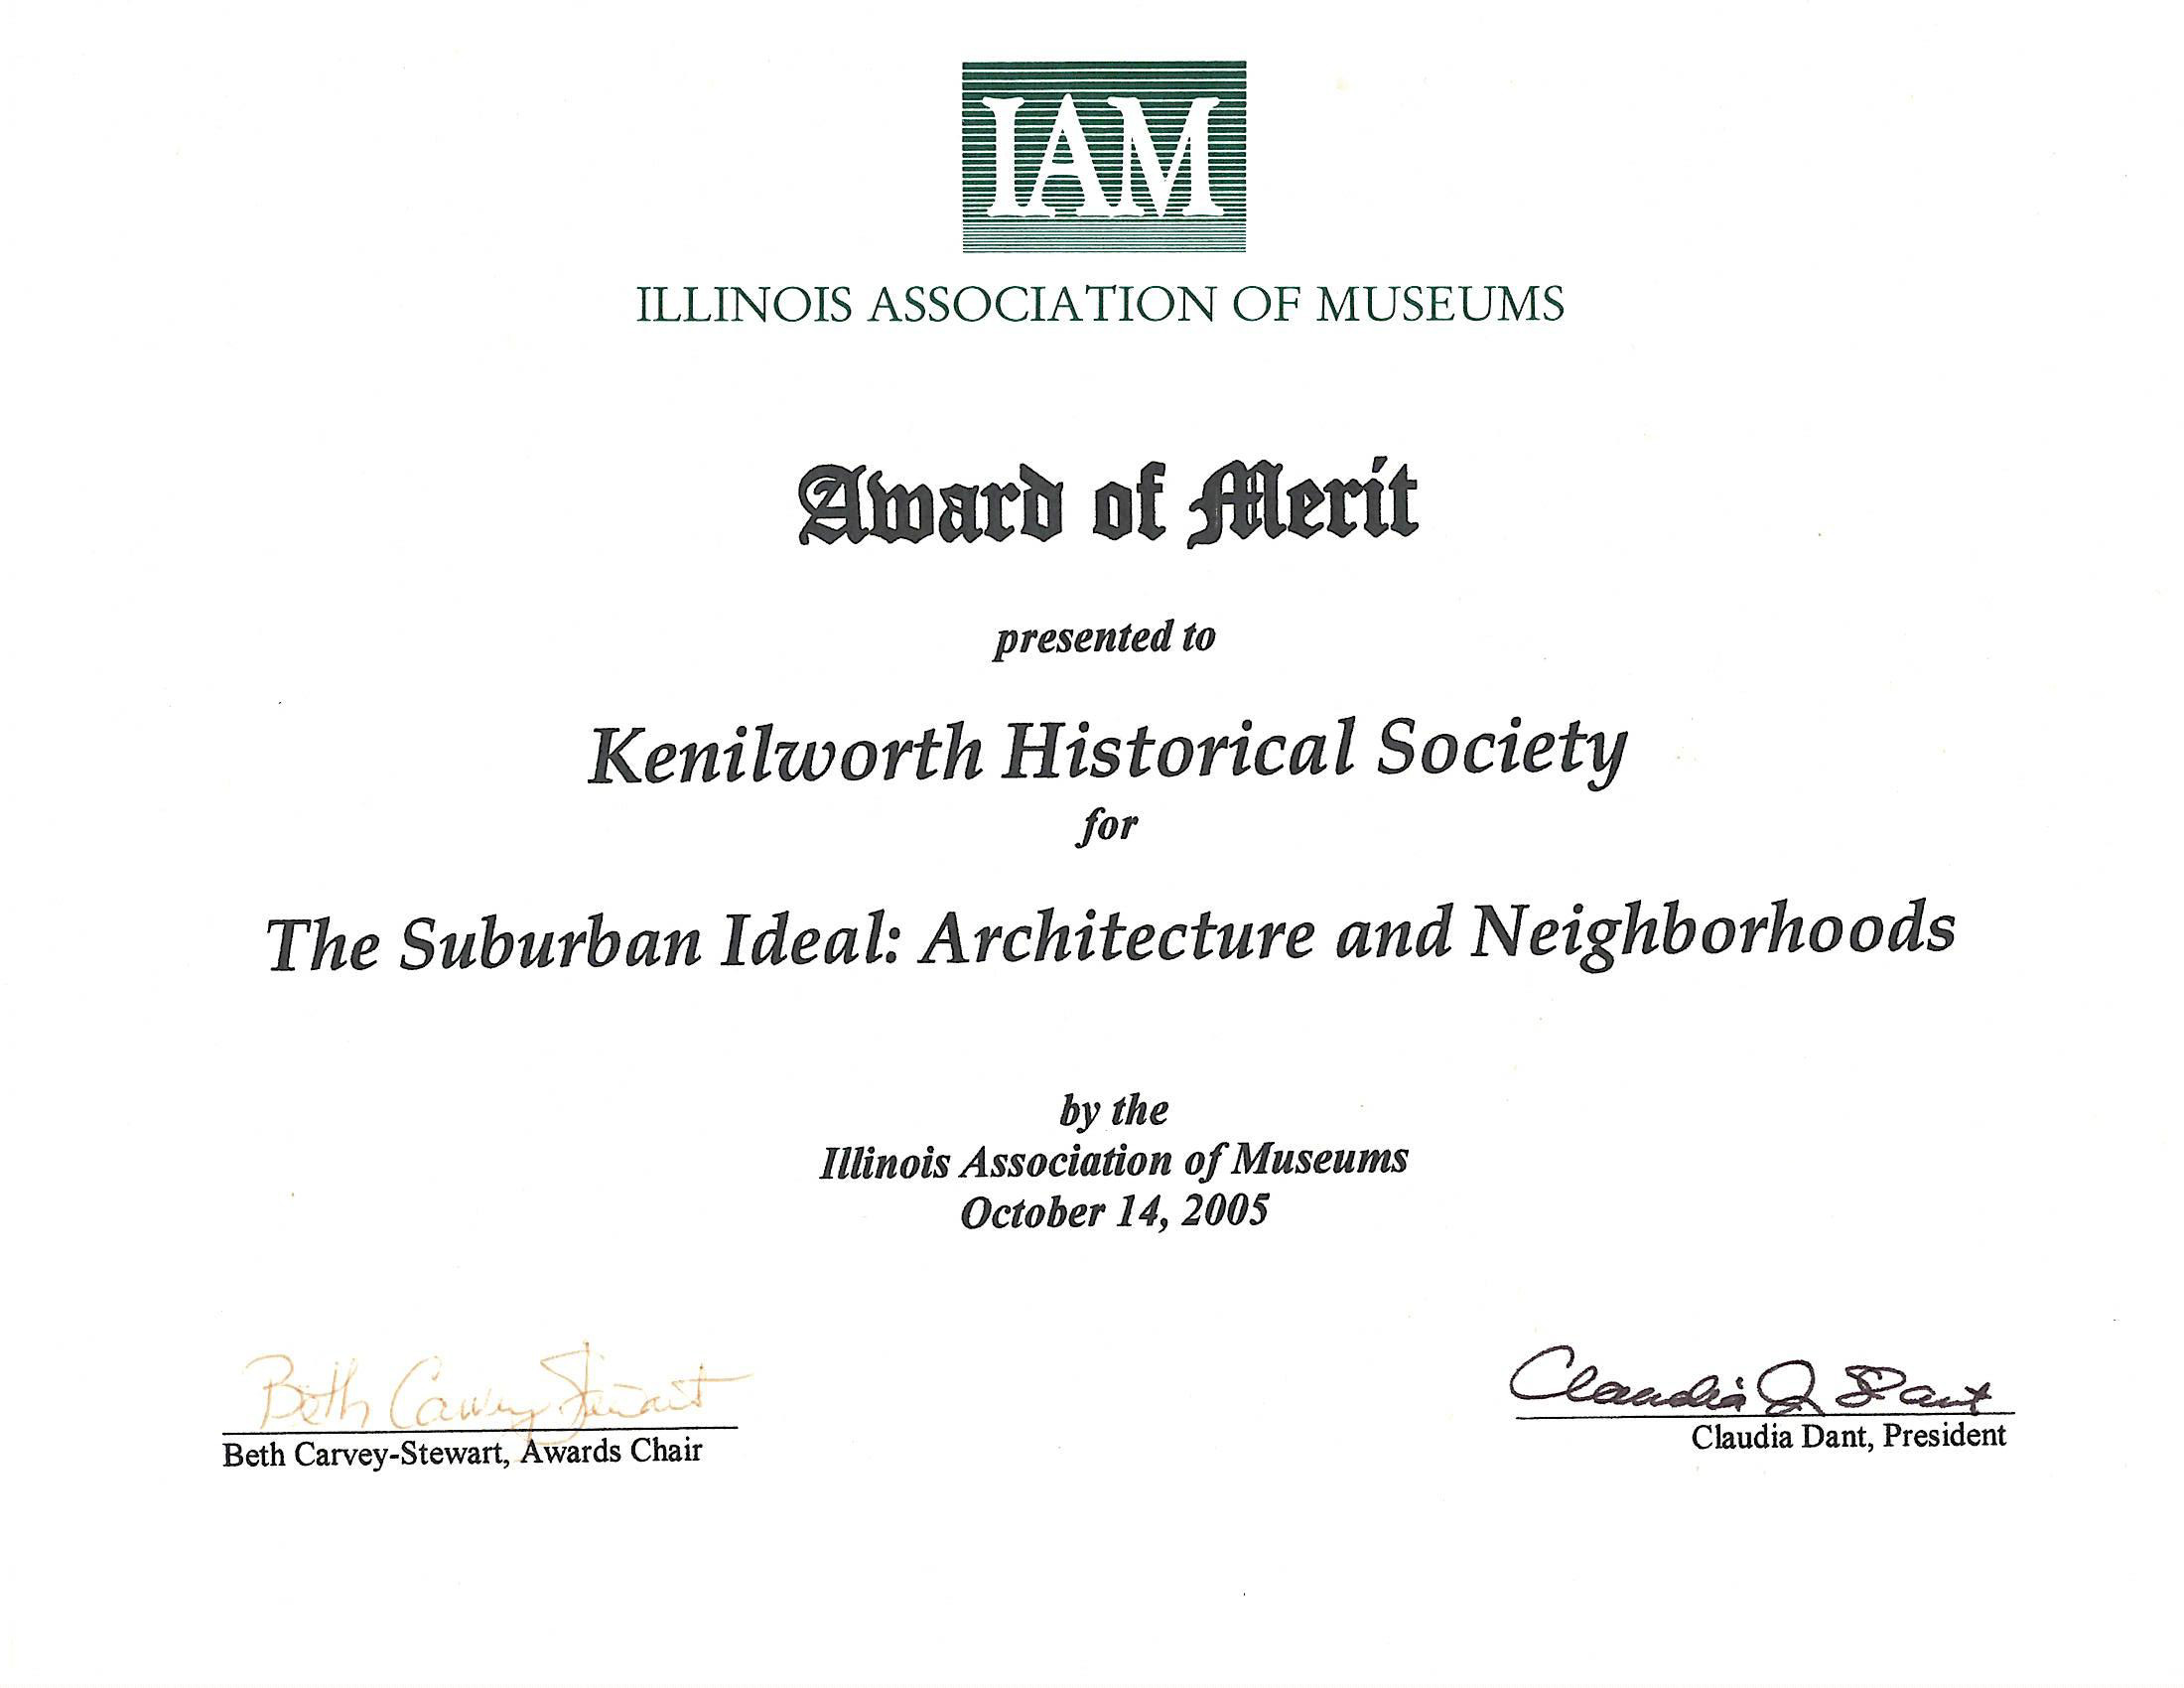 IAM award for The Suburban Ideal: Architecture and Neighborhoods 2005